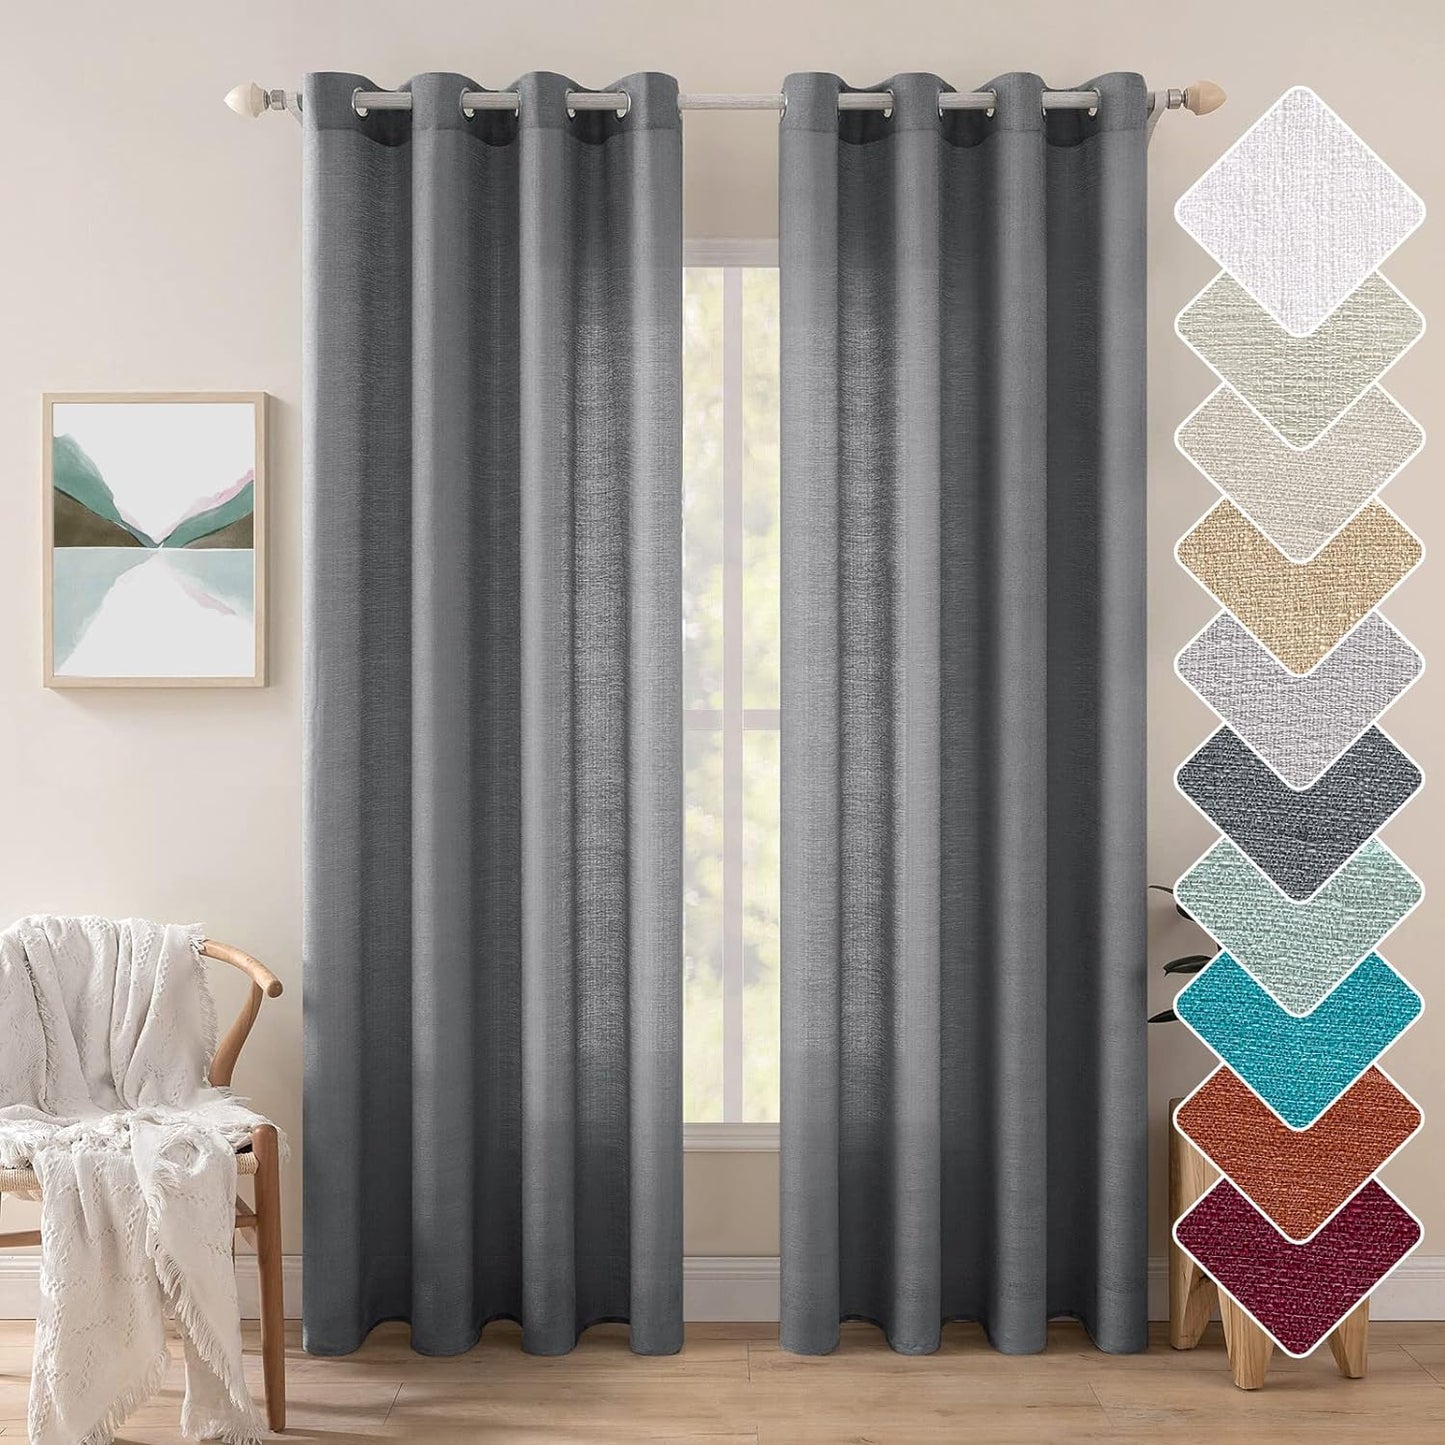 MIULEE Burnt Orange Linen Semi Sheer Curtains 2 Panels for Living Room Bedroom Linen Textured Light Filtering Privacy Window Curtains Terracotta Grommet Drapes Rust Boho Fall Decor W 52 X L 84 Inches  MIULEE Grommet | Dark Grey W52 X L72 